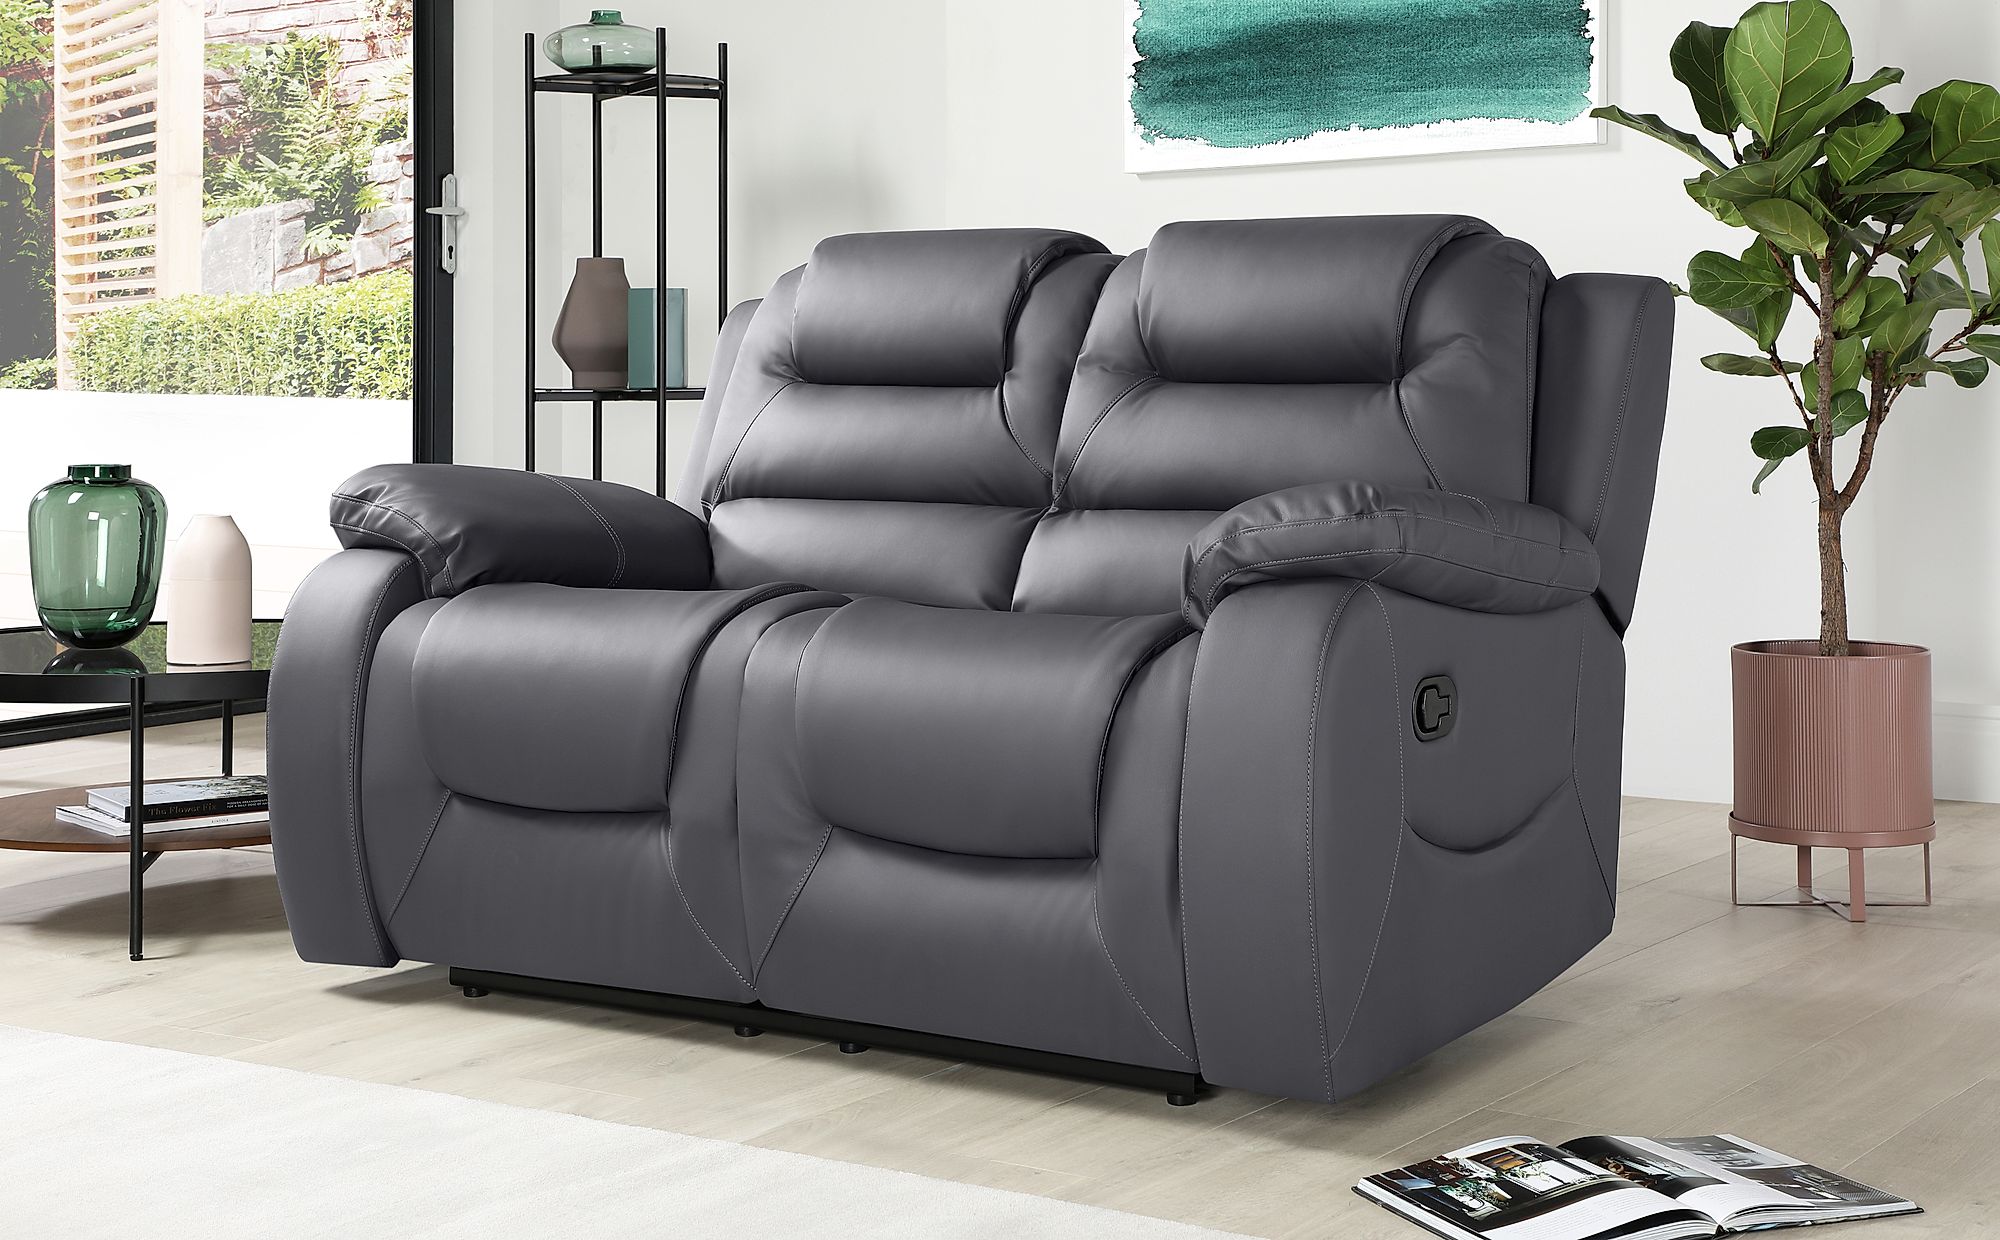 grey leather 2 seater recliner sofa